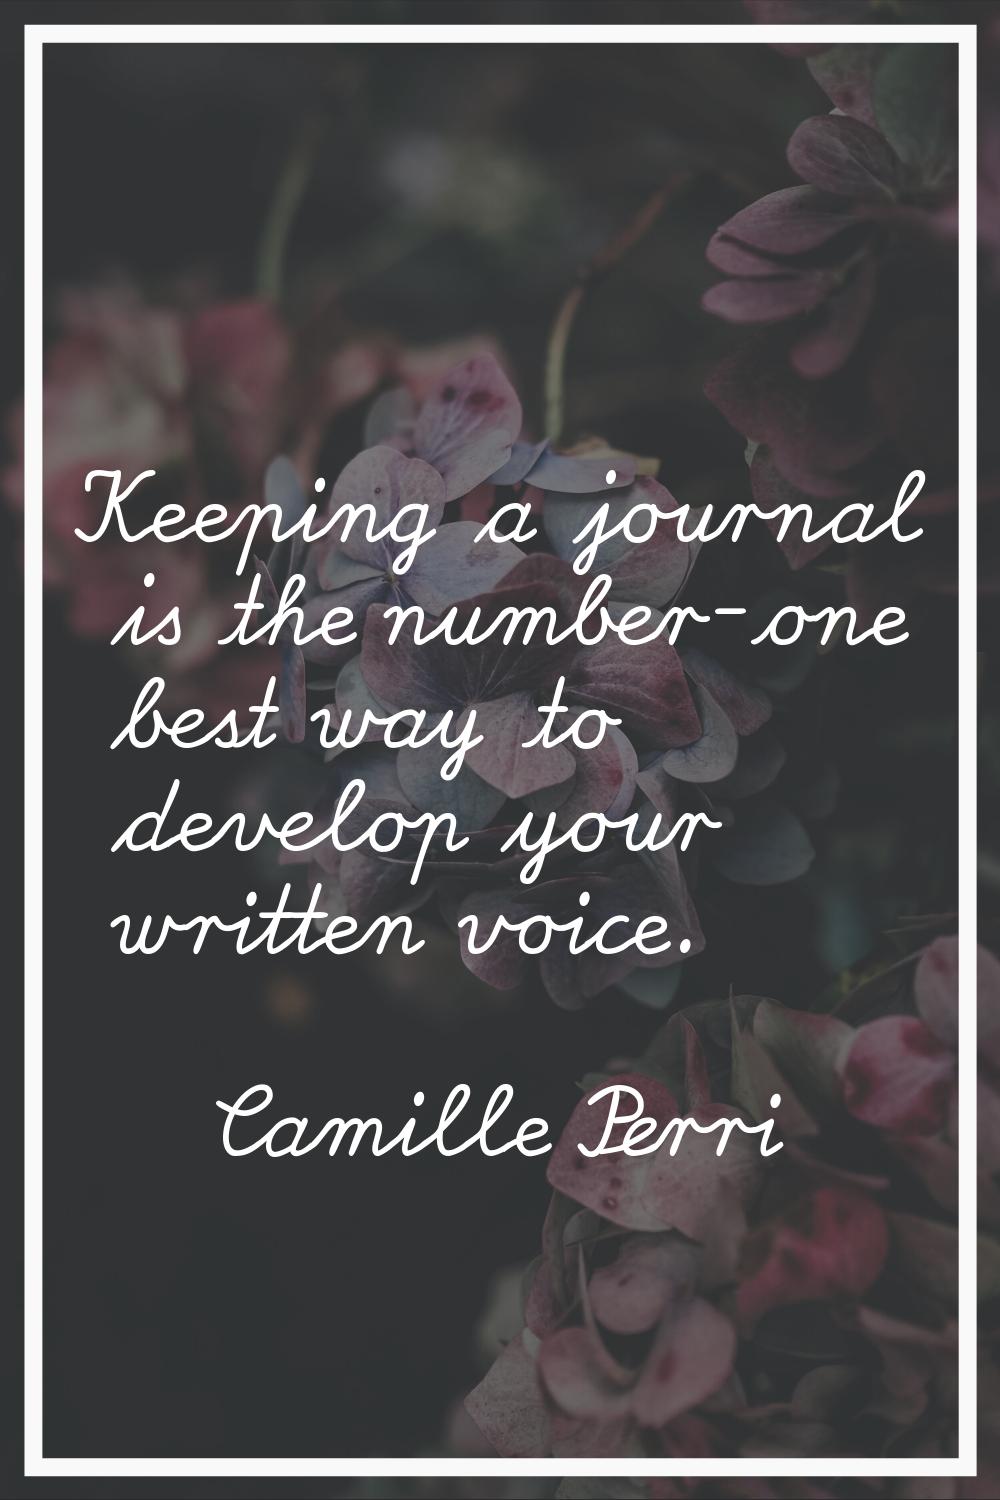 Keeping a journal is the number-one best way to develop your written voice.